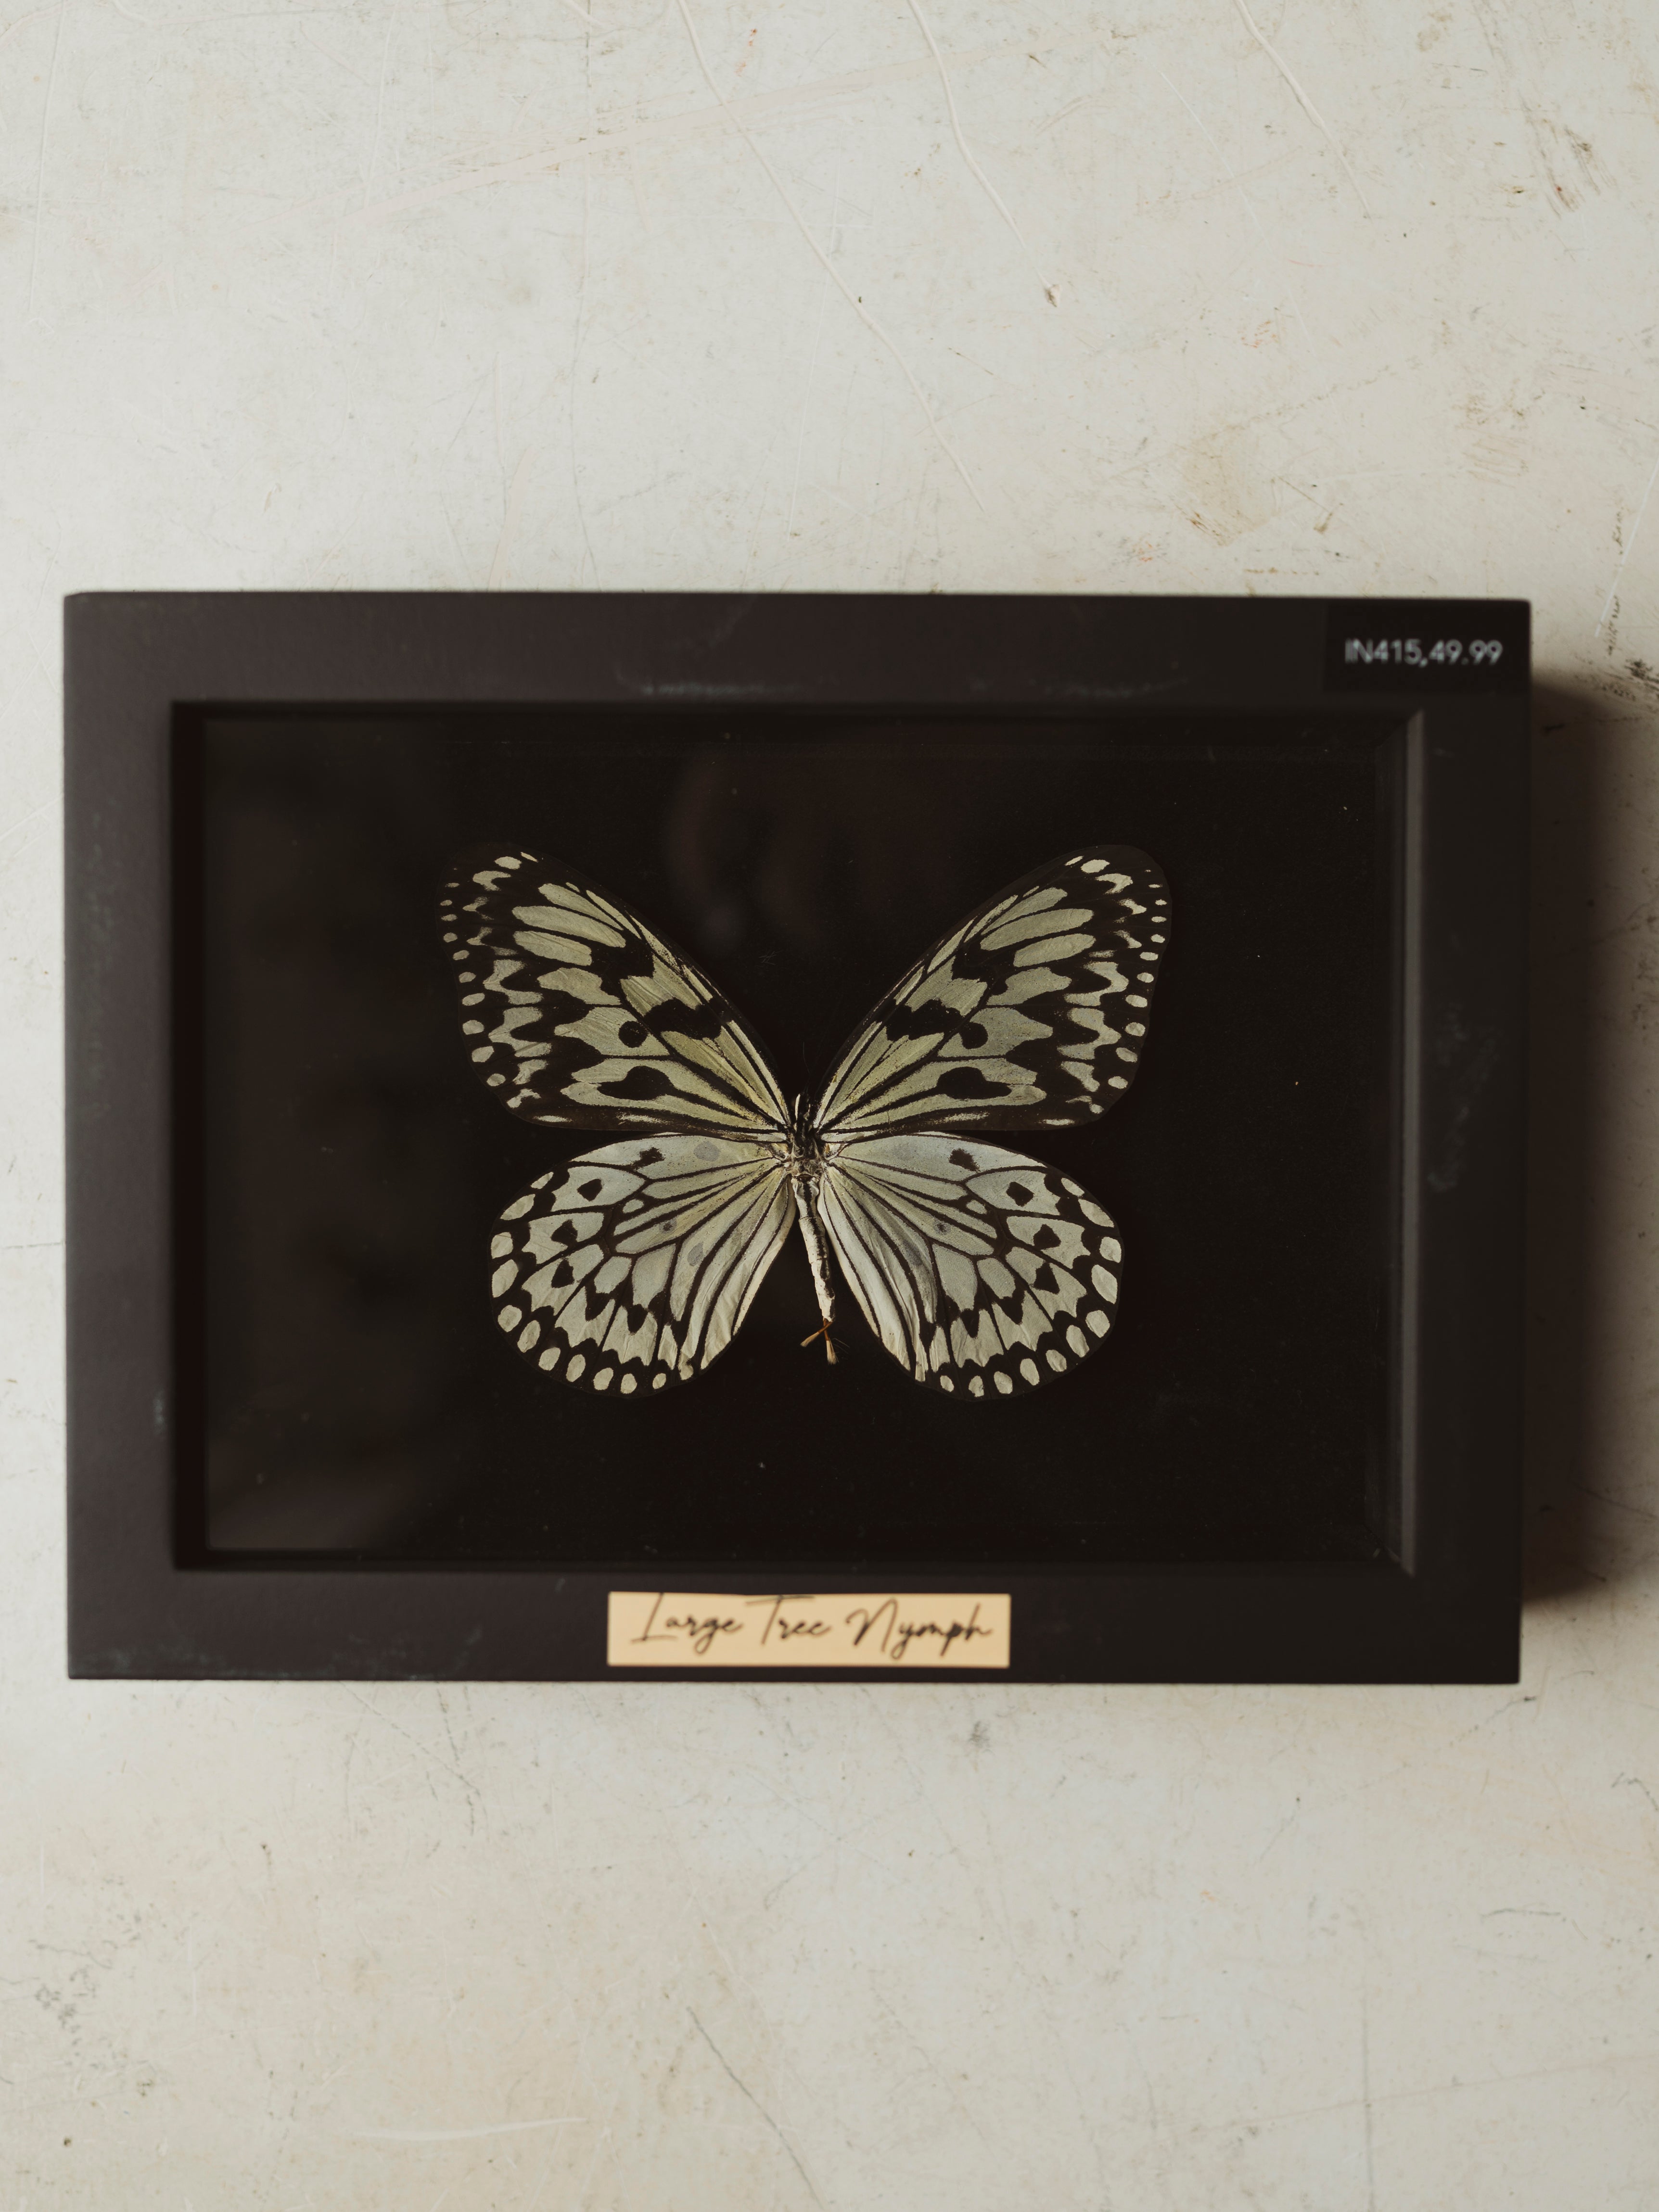 5.75" Framed Large Tree Nymph, IN415